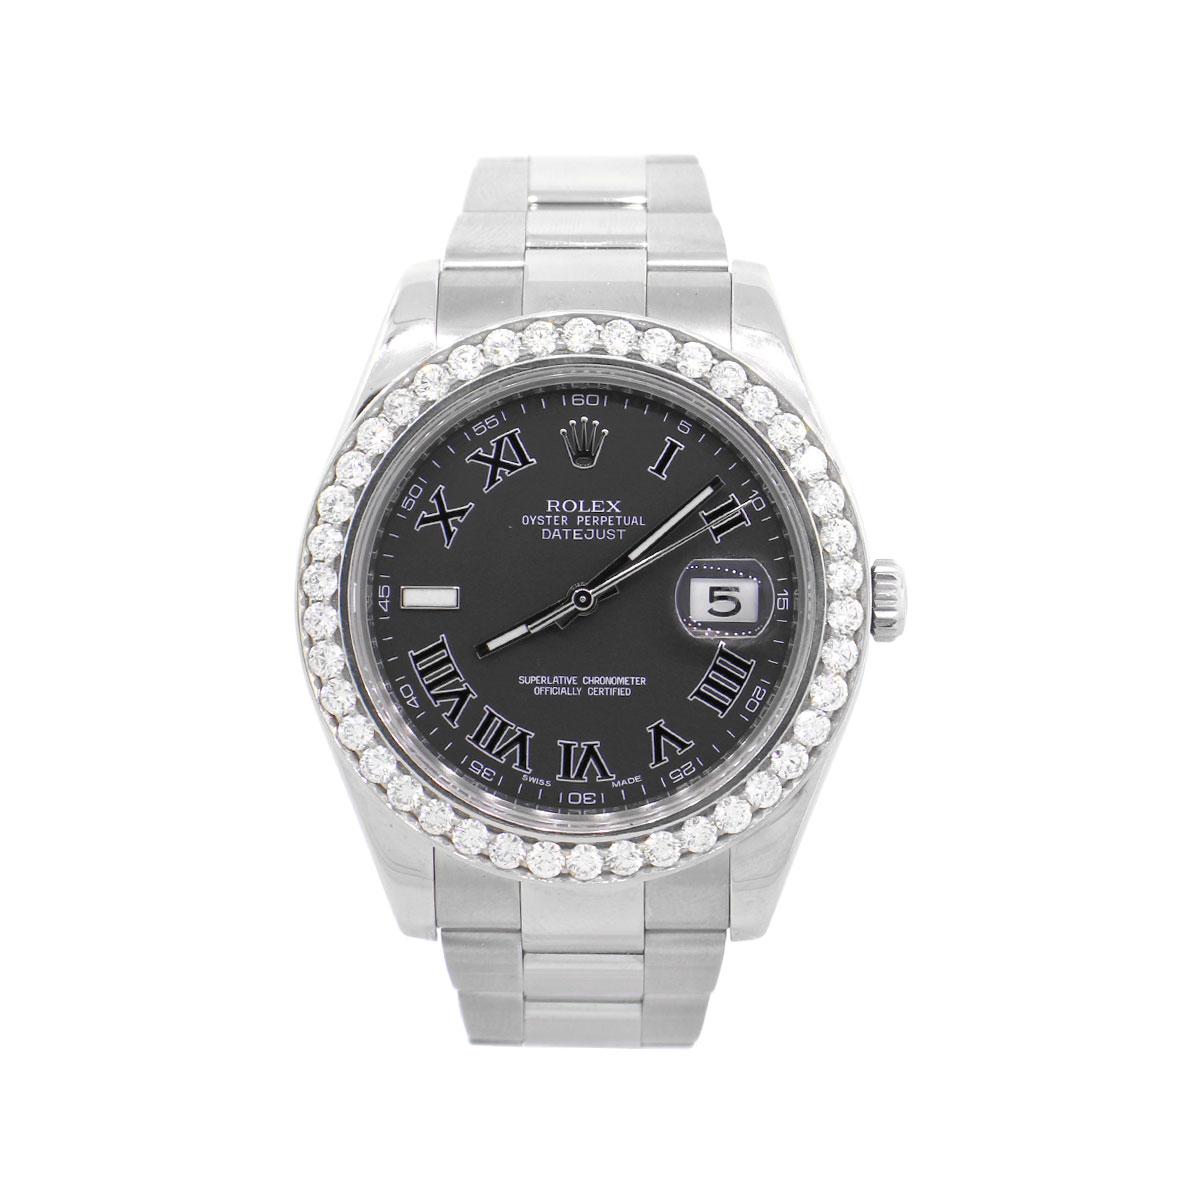 Brand: Rolex
MPN: 116334
Model: Datejust II
Case Material: Stainless Steel
Case Diameter: 41mm
Crystal: Scratch resistant sapphire
Bezel: Stainless Steel bezel with approx. 3ctw round diamonds
Dial: Aftermarket black Roman dial with silver hands.